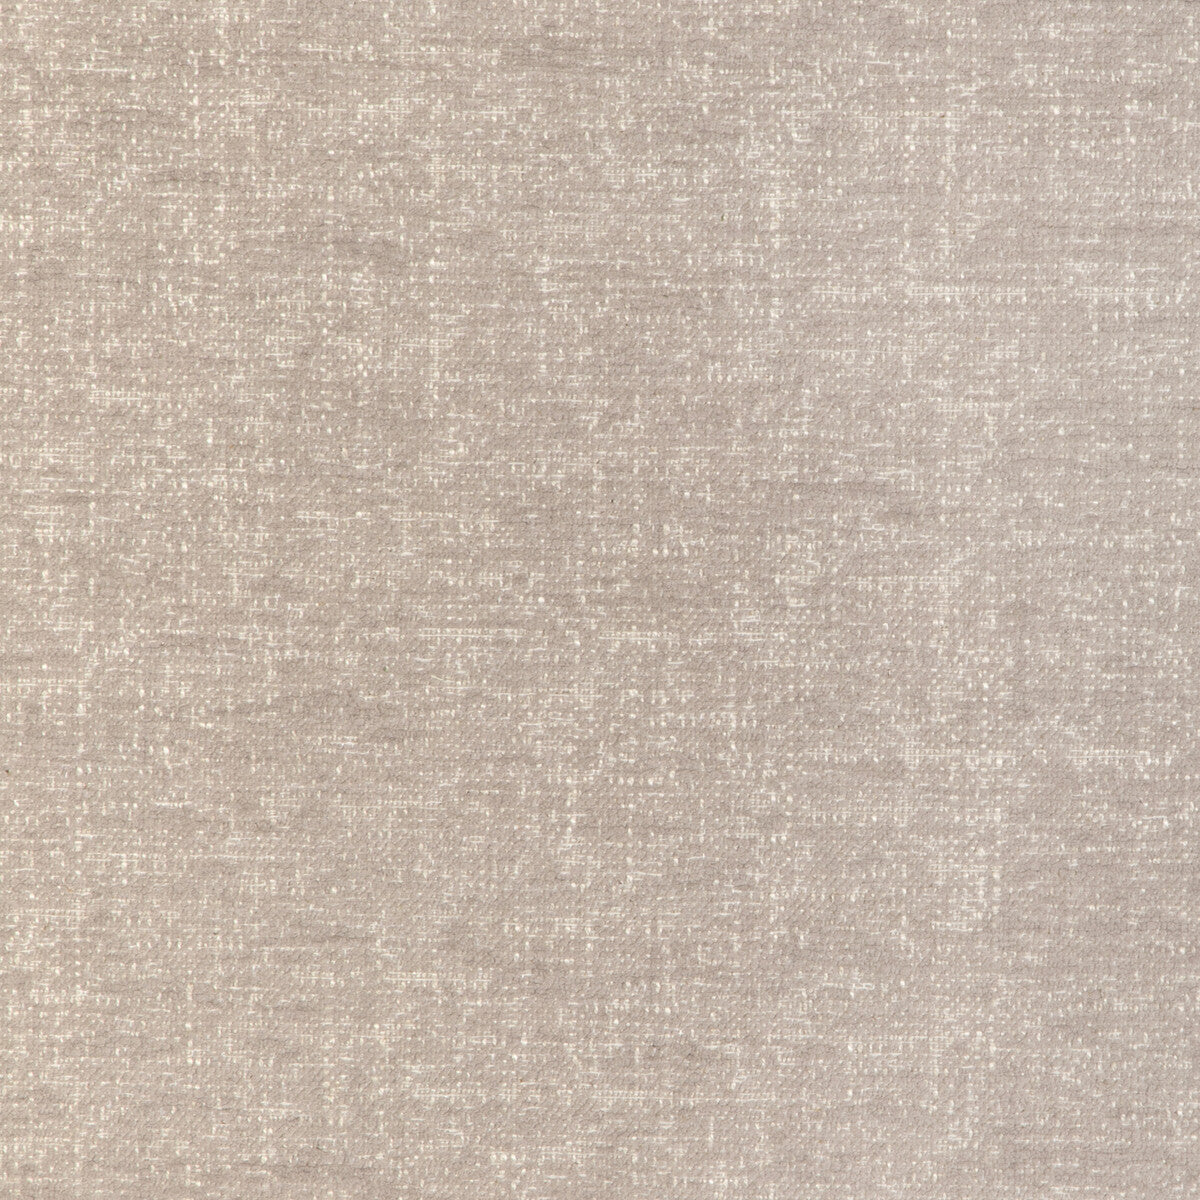 Kravet Design fabric in 36951-1614 color - pattern 36951.1614.0 - by Kravet Design in the Sustainable Textures II collection